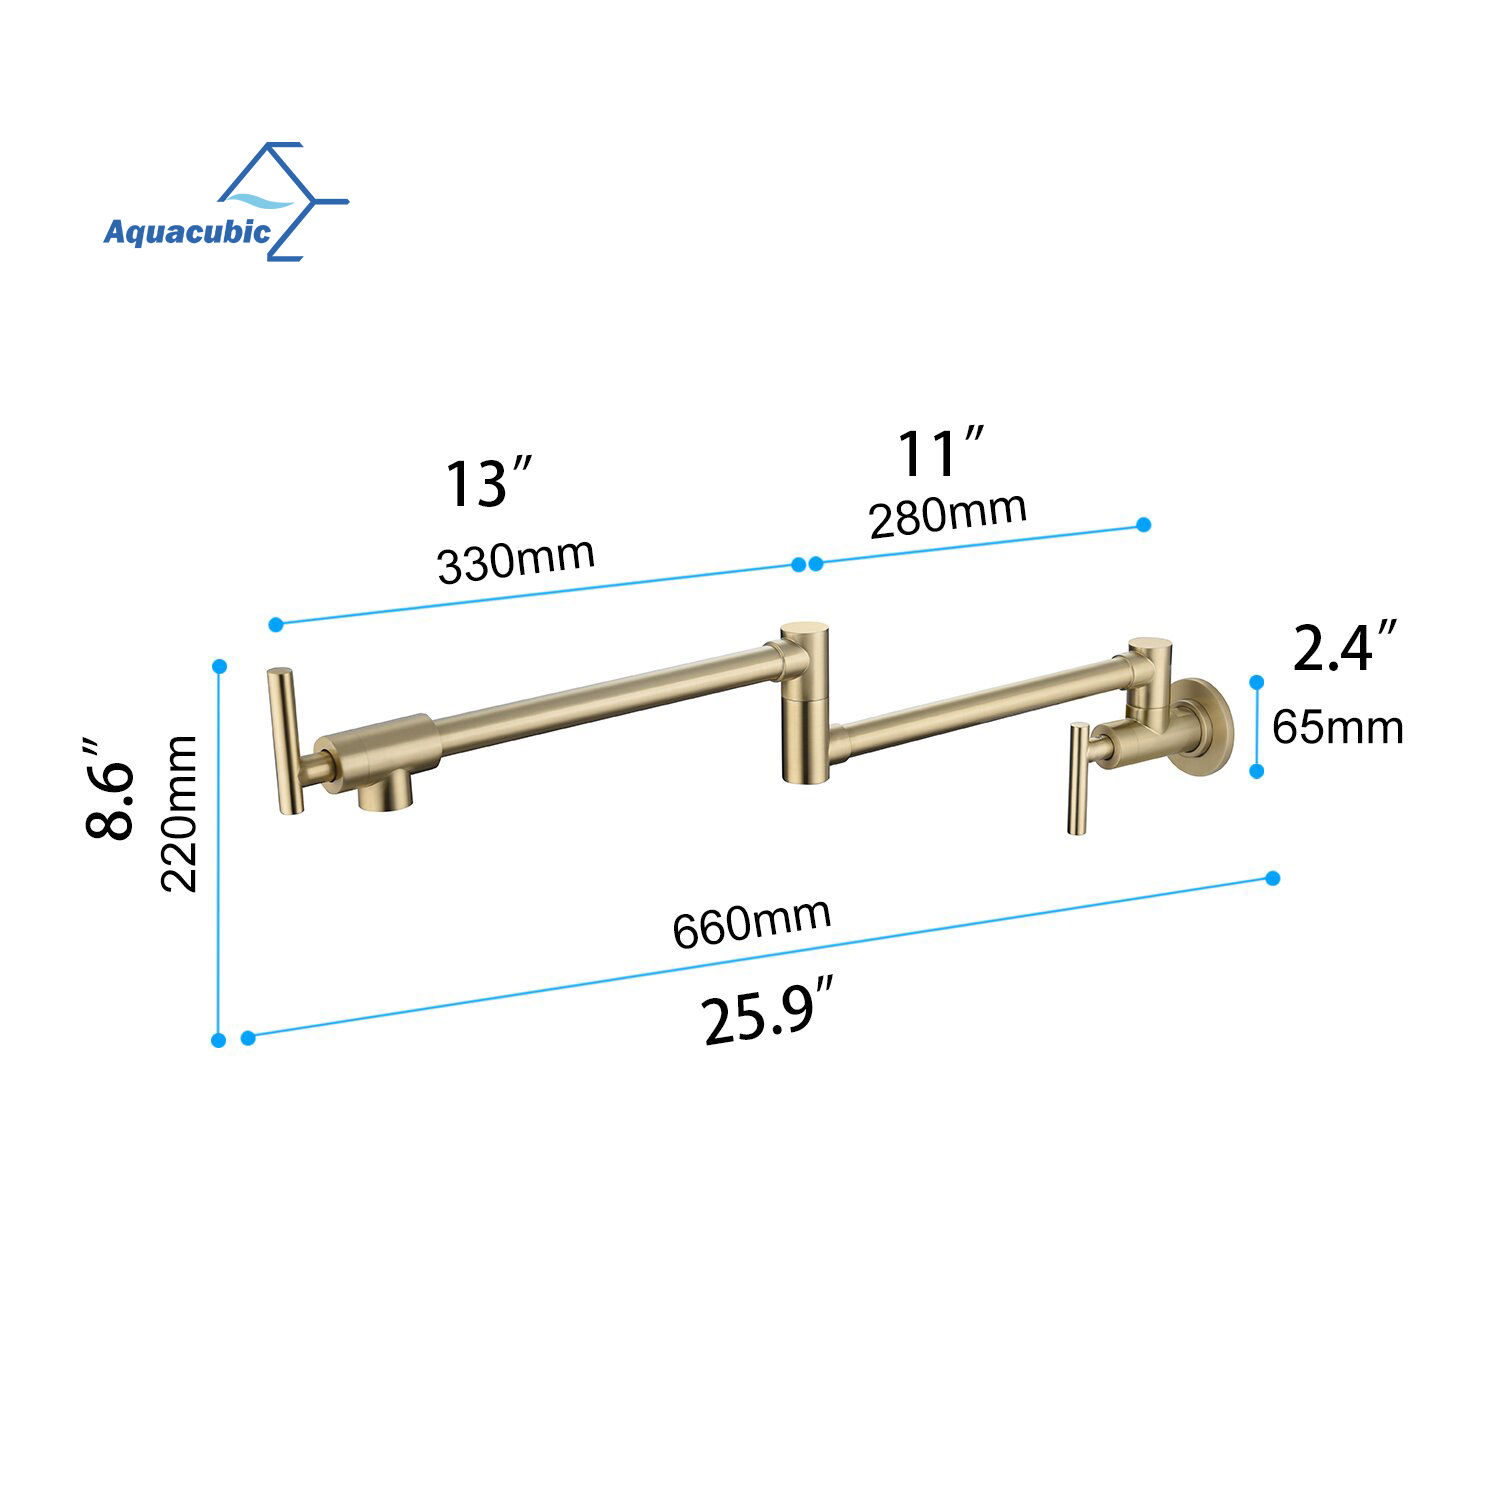 Modern Kitchen Sink Faucet Folding Stretchable with Single Hole Wall Mount Pot Filler Kitchen Faucet Solid Brass Two Handles Pot Filler Folding Faucets